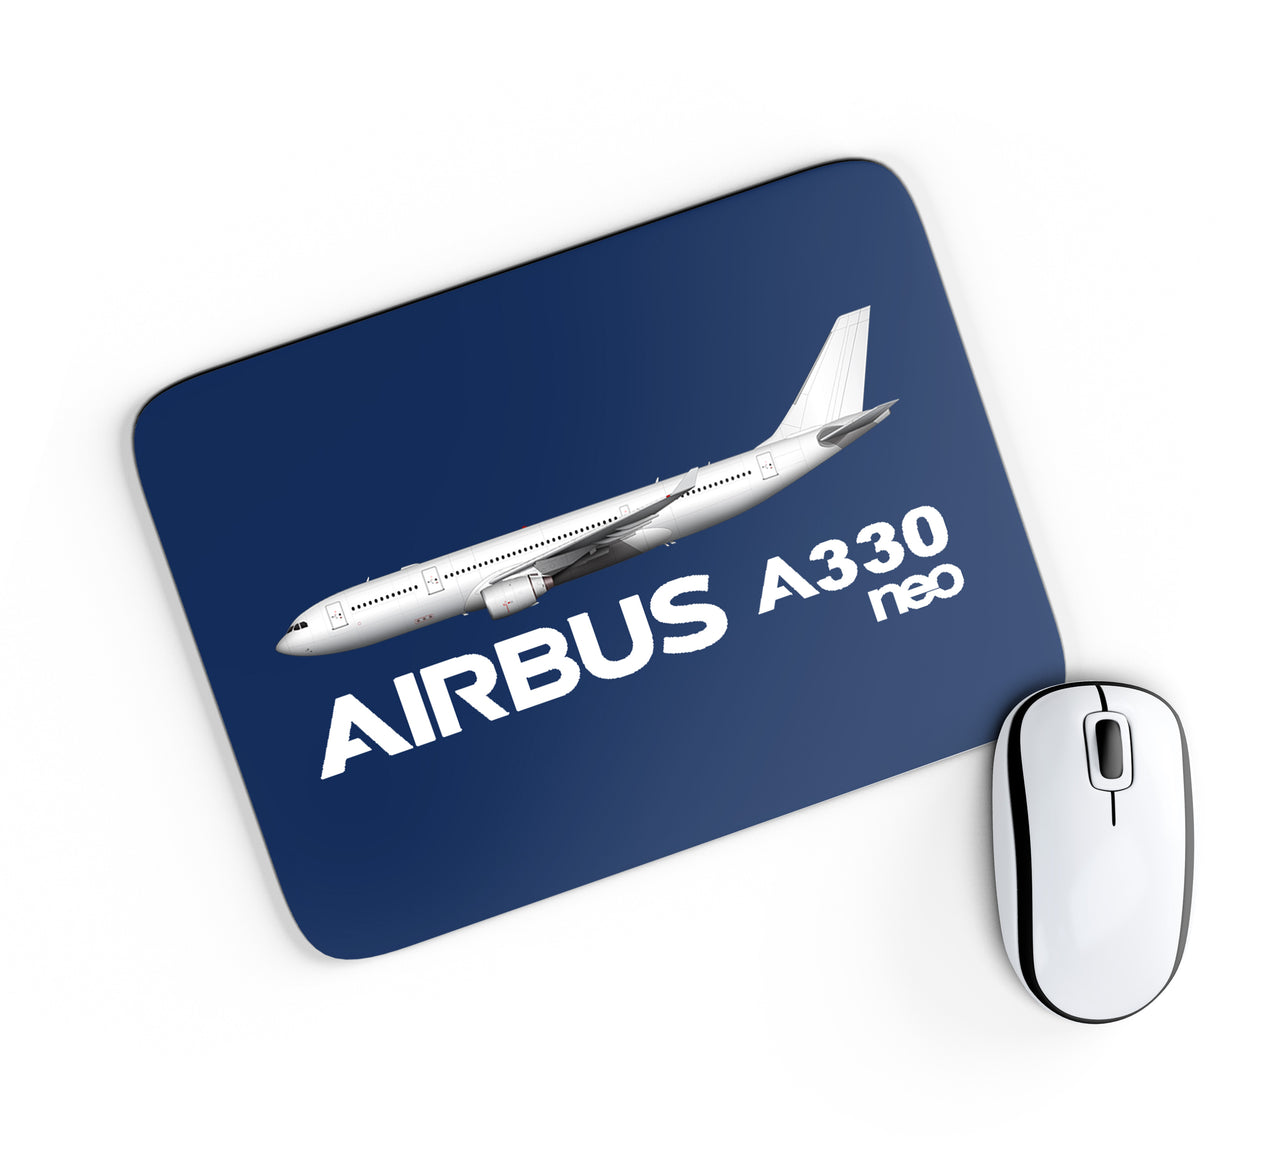 The Airbus A330neo Designed Mouse Pads